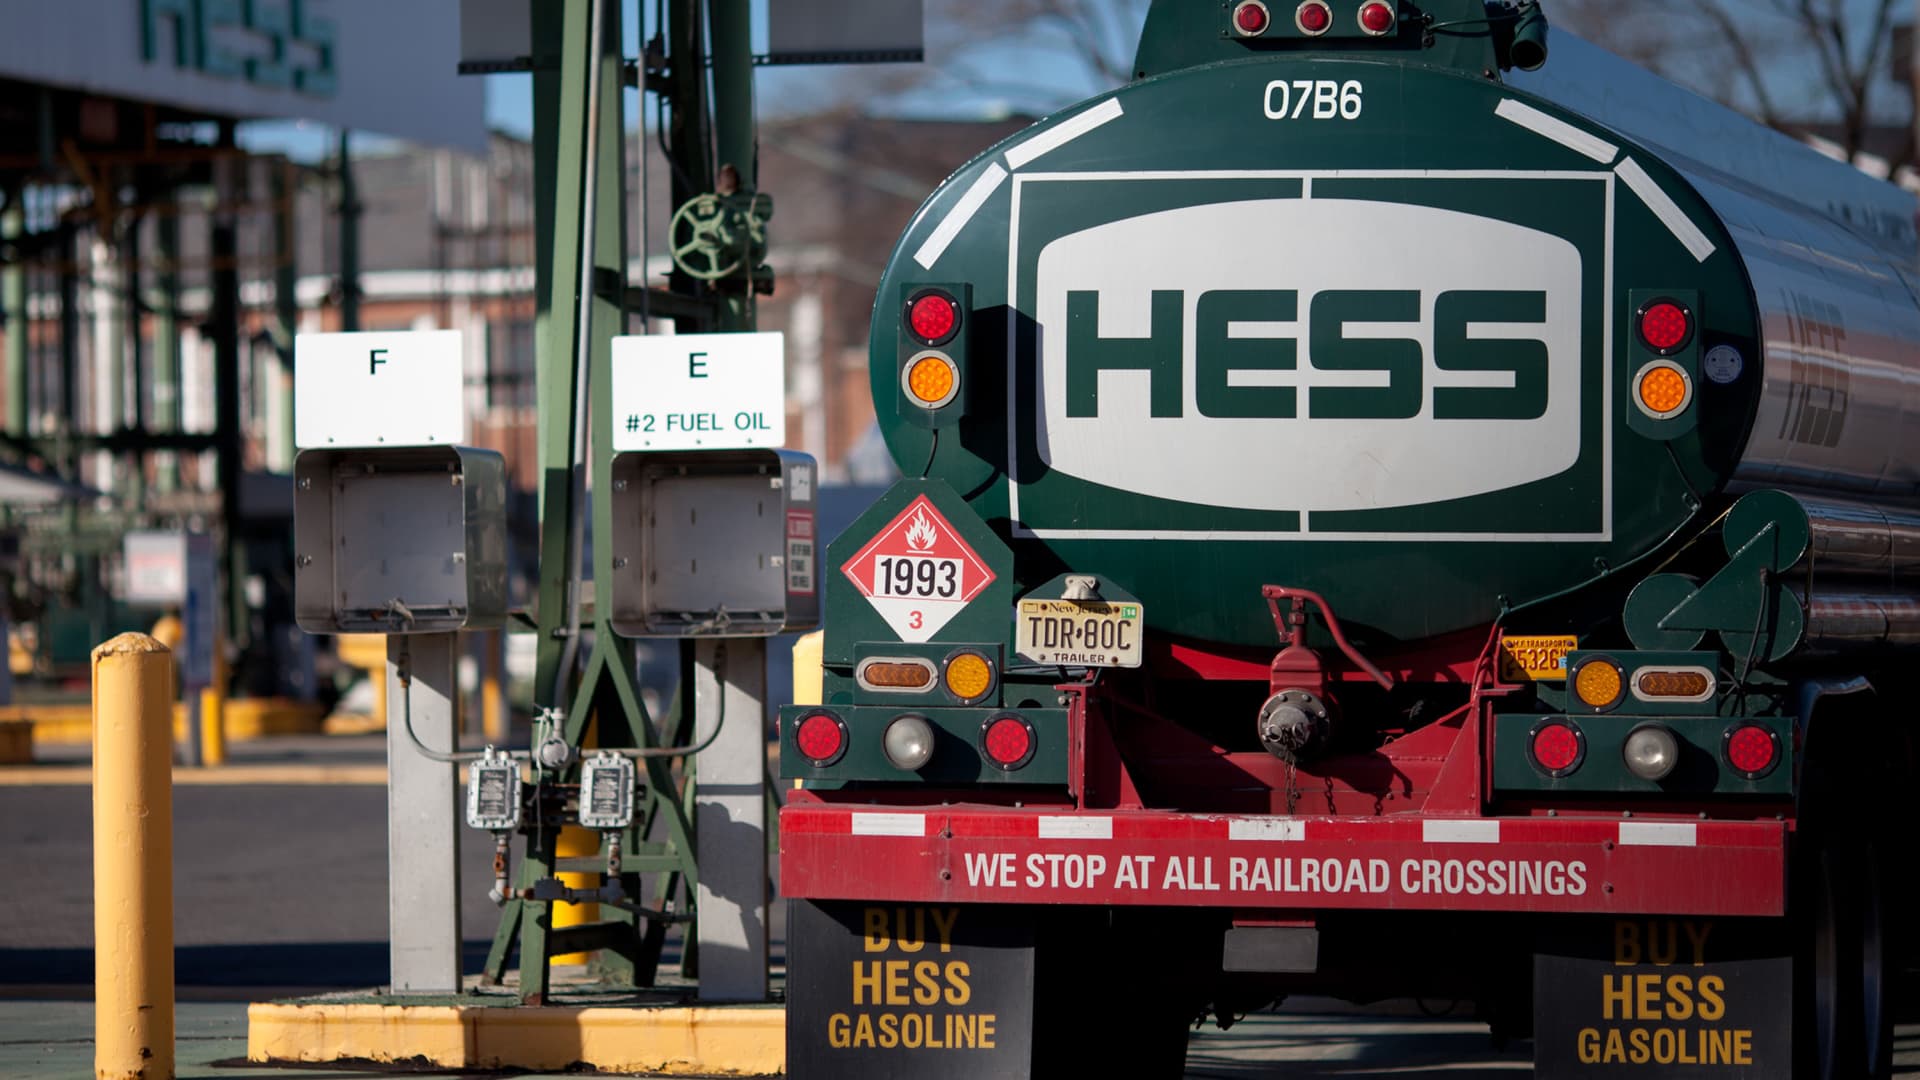 Chevron to buy Hess Corp for $53 billion in second oil mega-merger in weeks